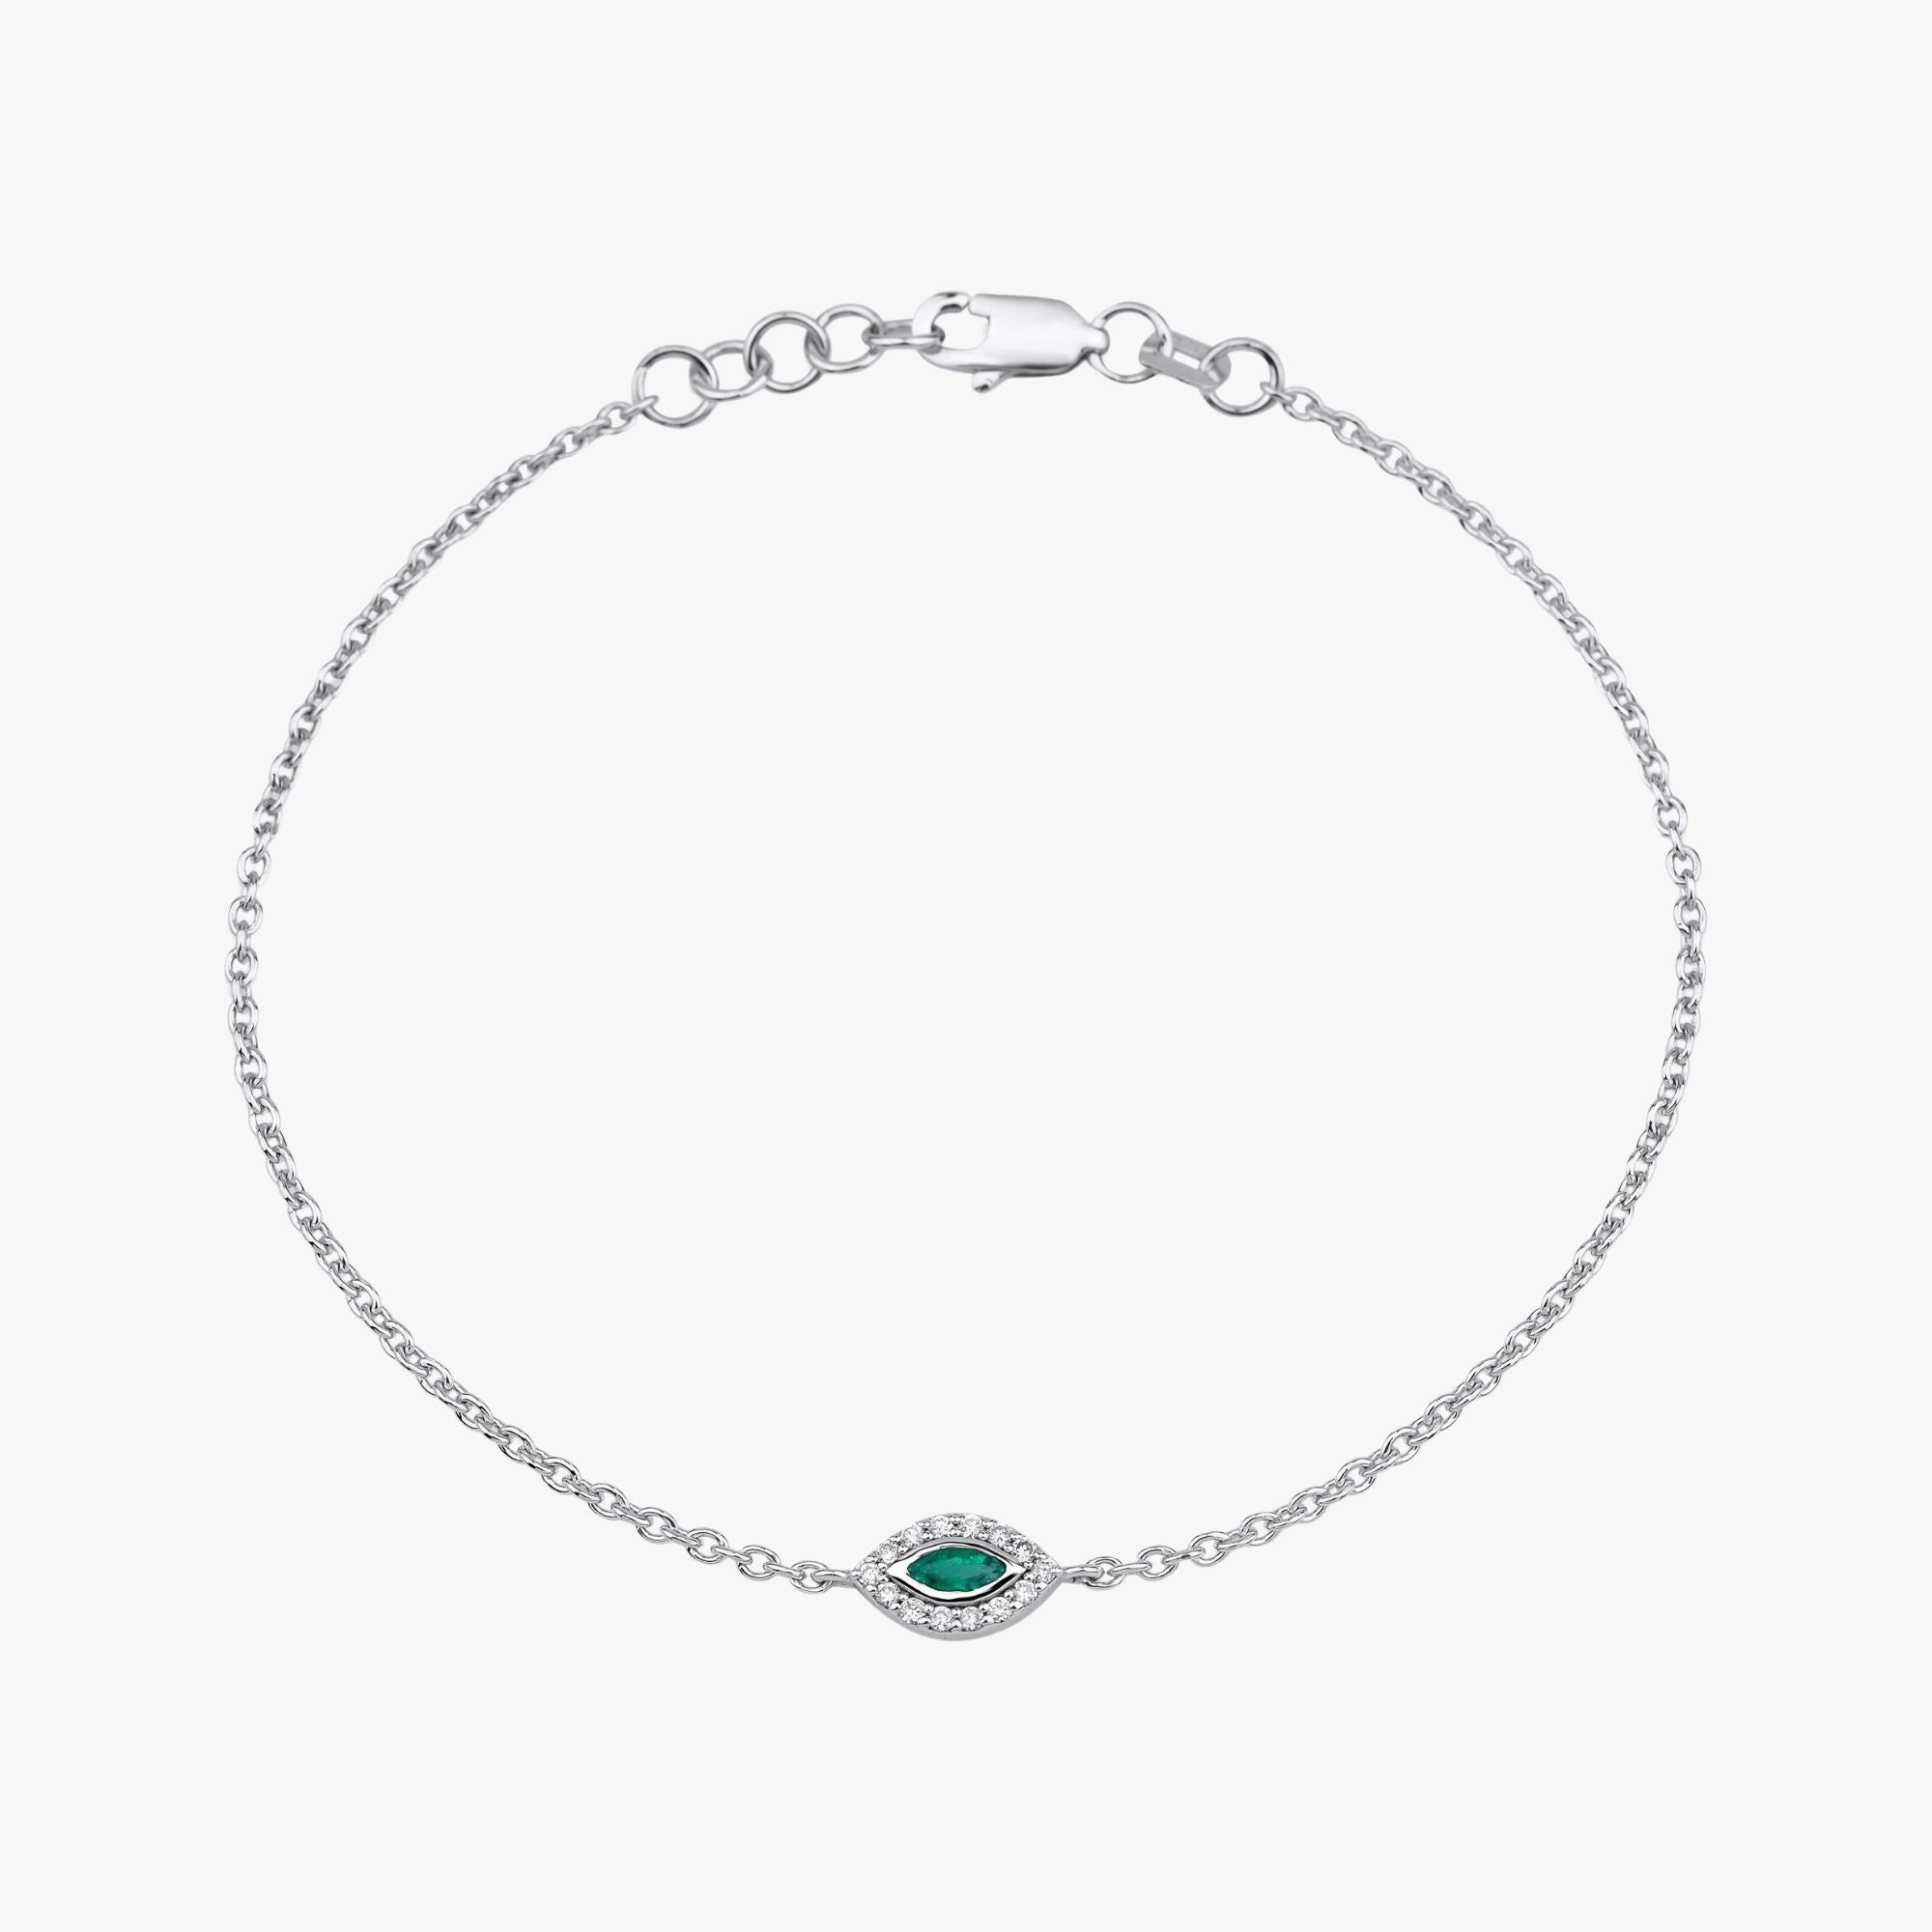 Mini Marquise Emerald And Diamond Bracelet Available In 14K And 18K Gold